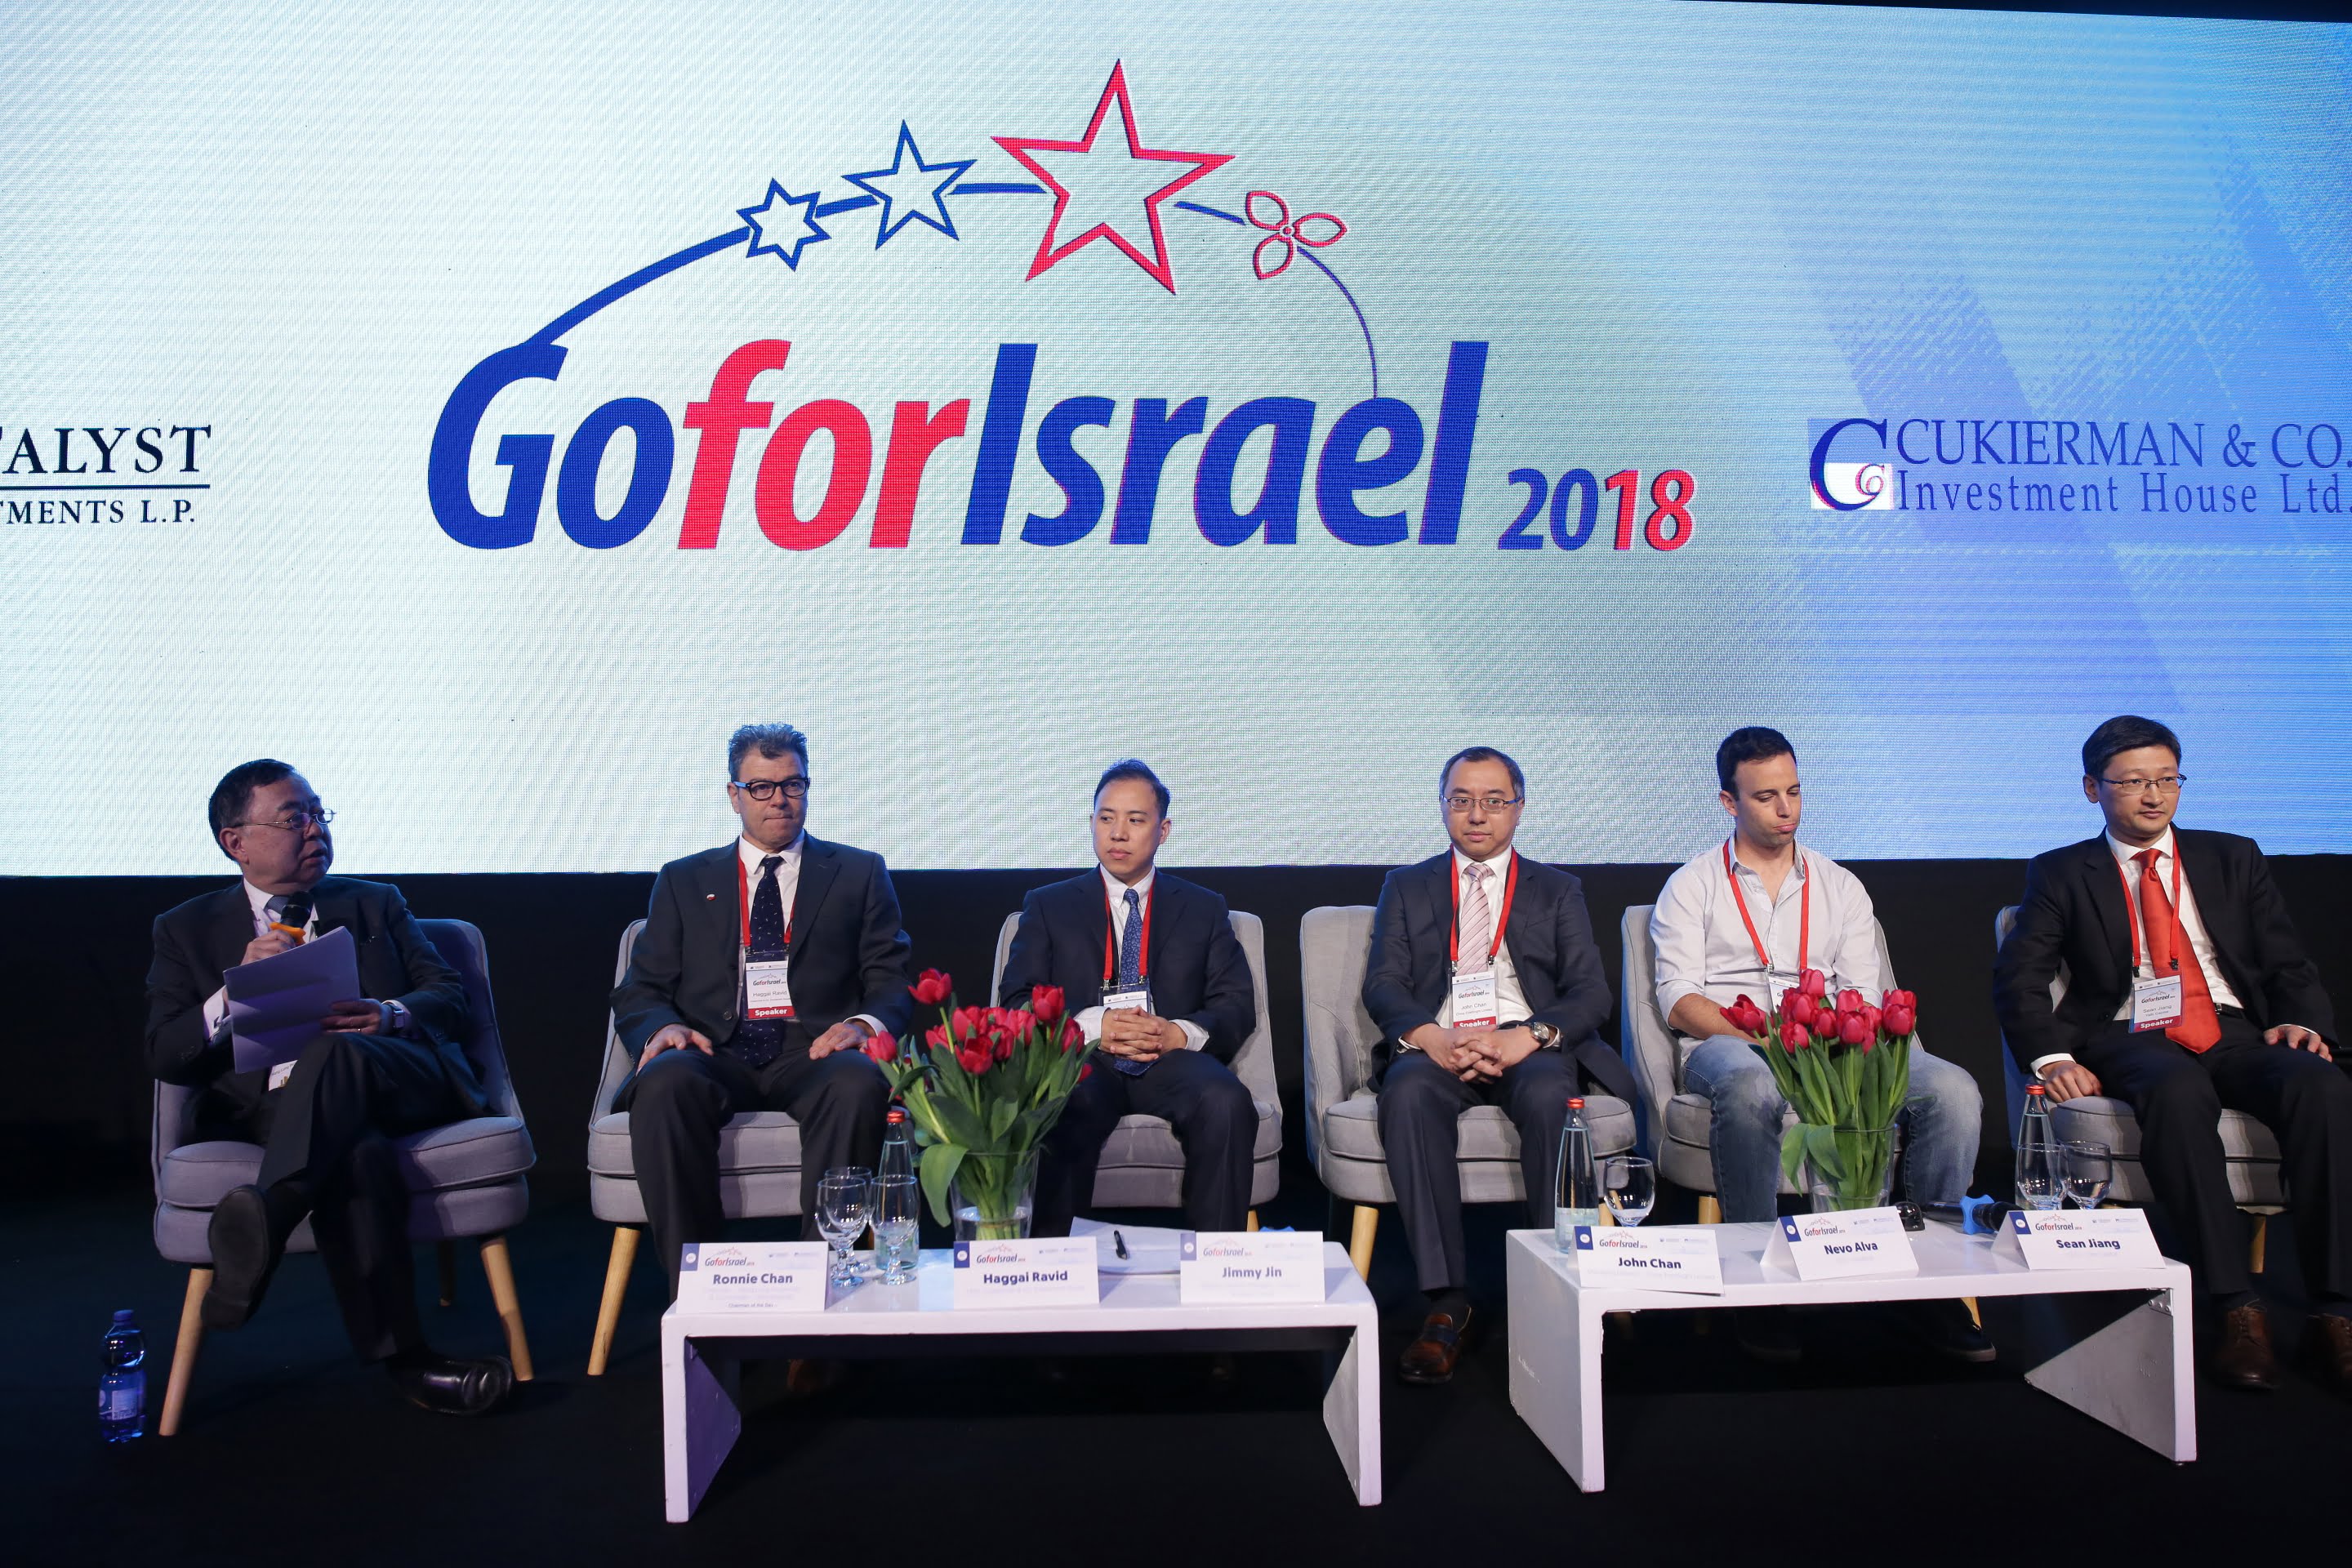 Go for Israel 2018. Courtesy